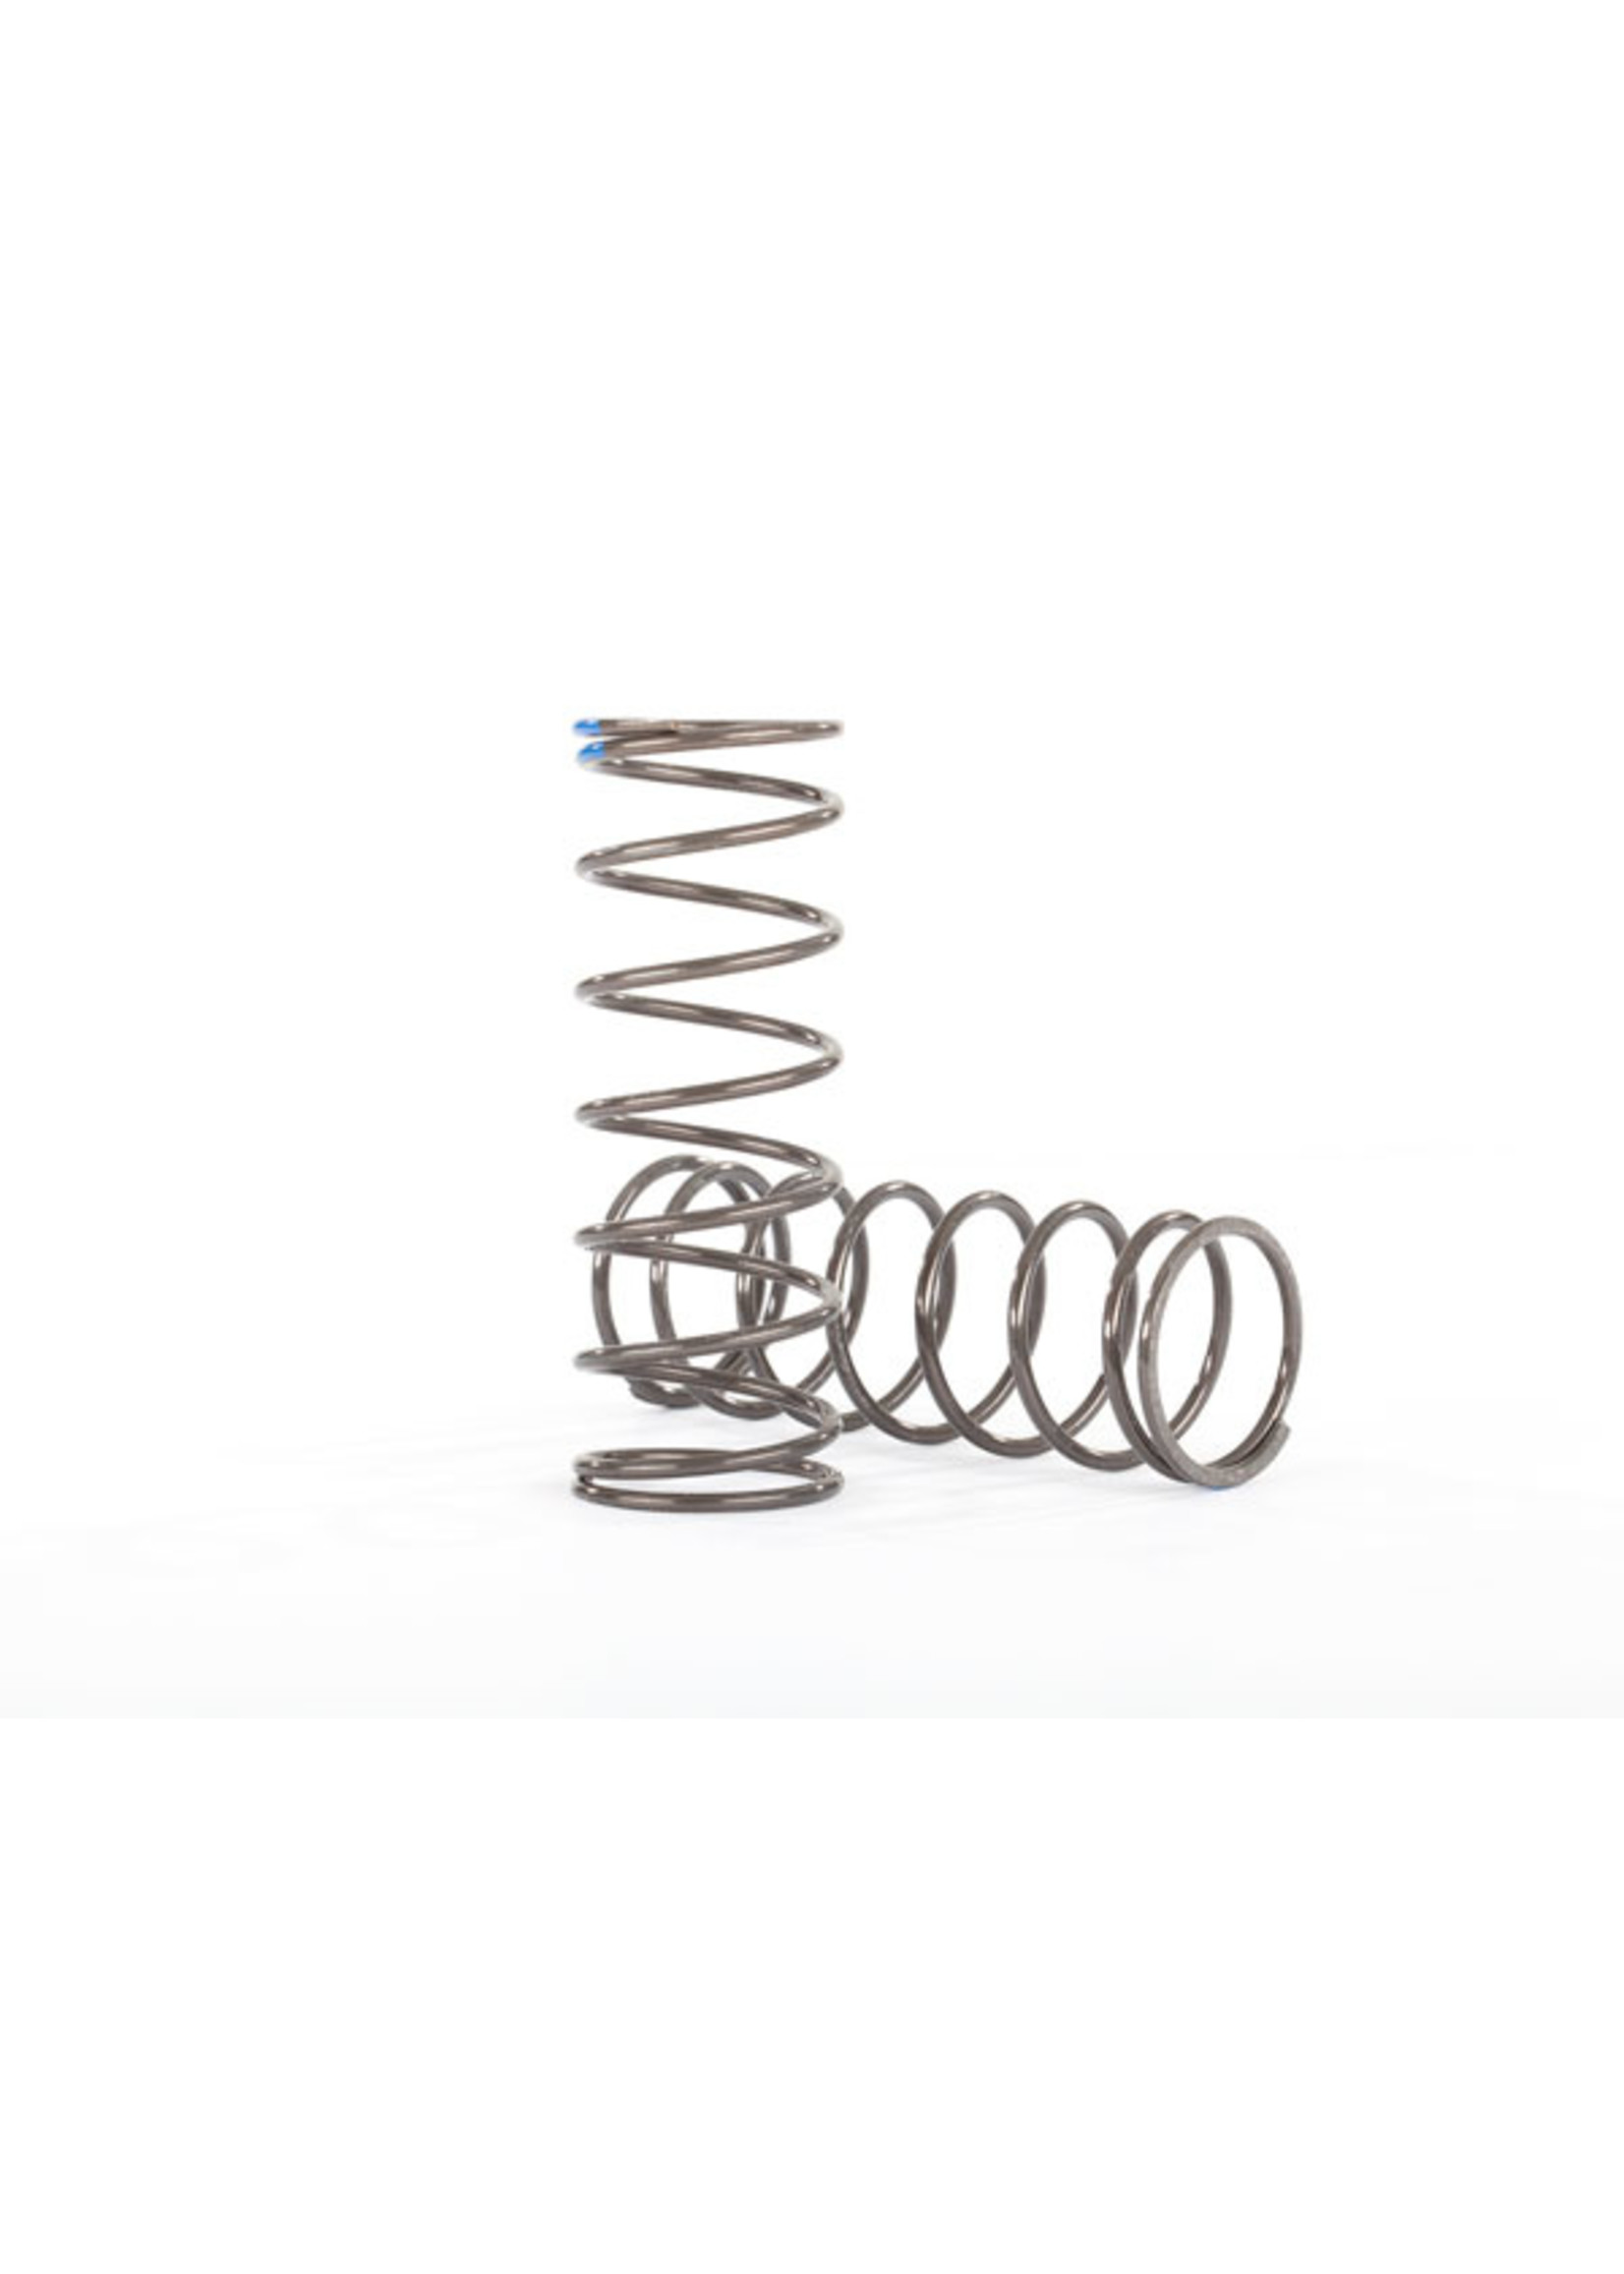 Traxxas 8969 - Shock Springs, Natural Finish - GT-Maxx 1.725 Rate (2)